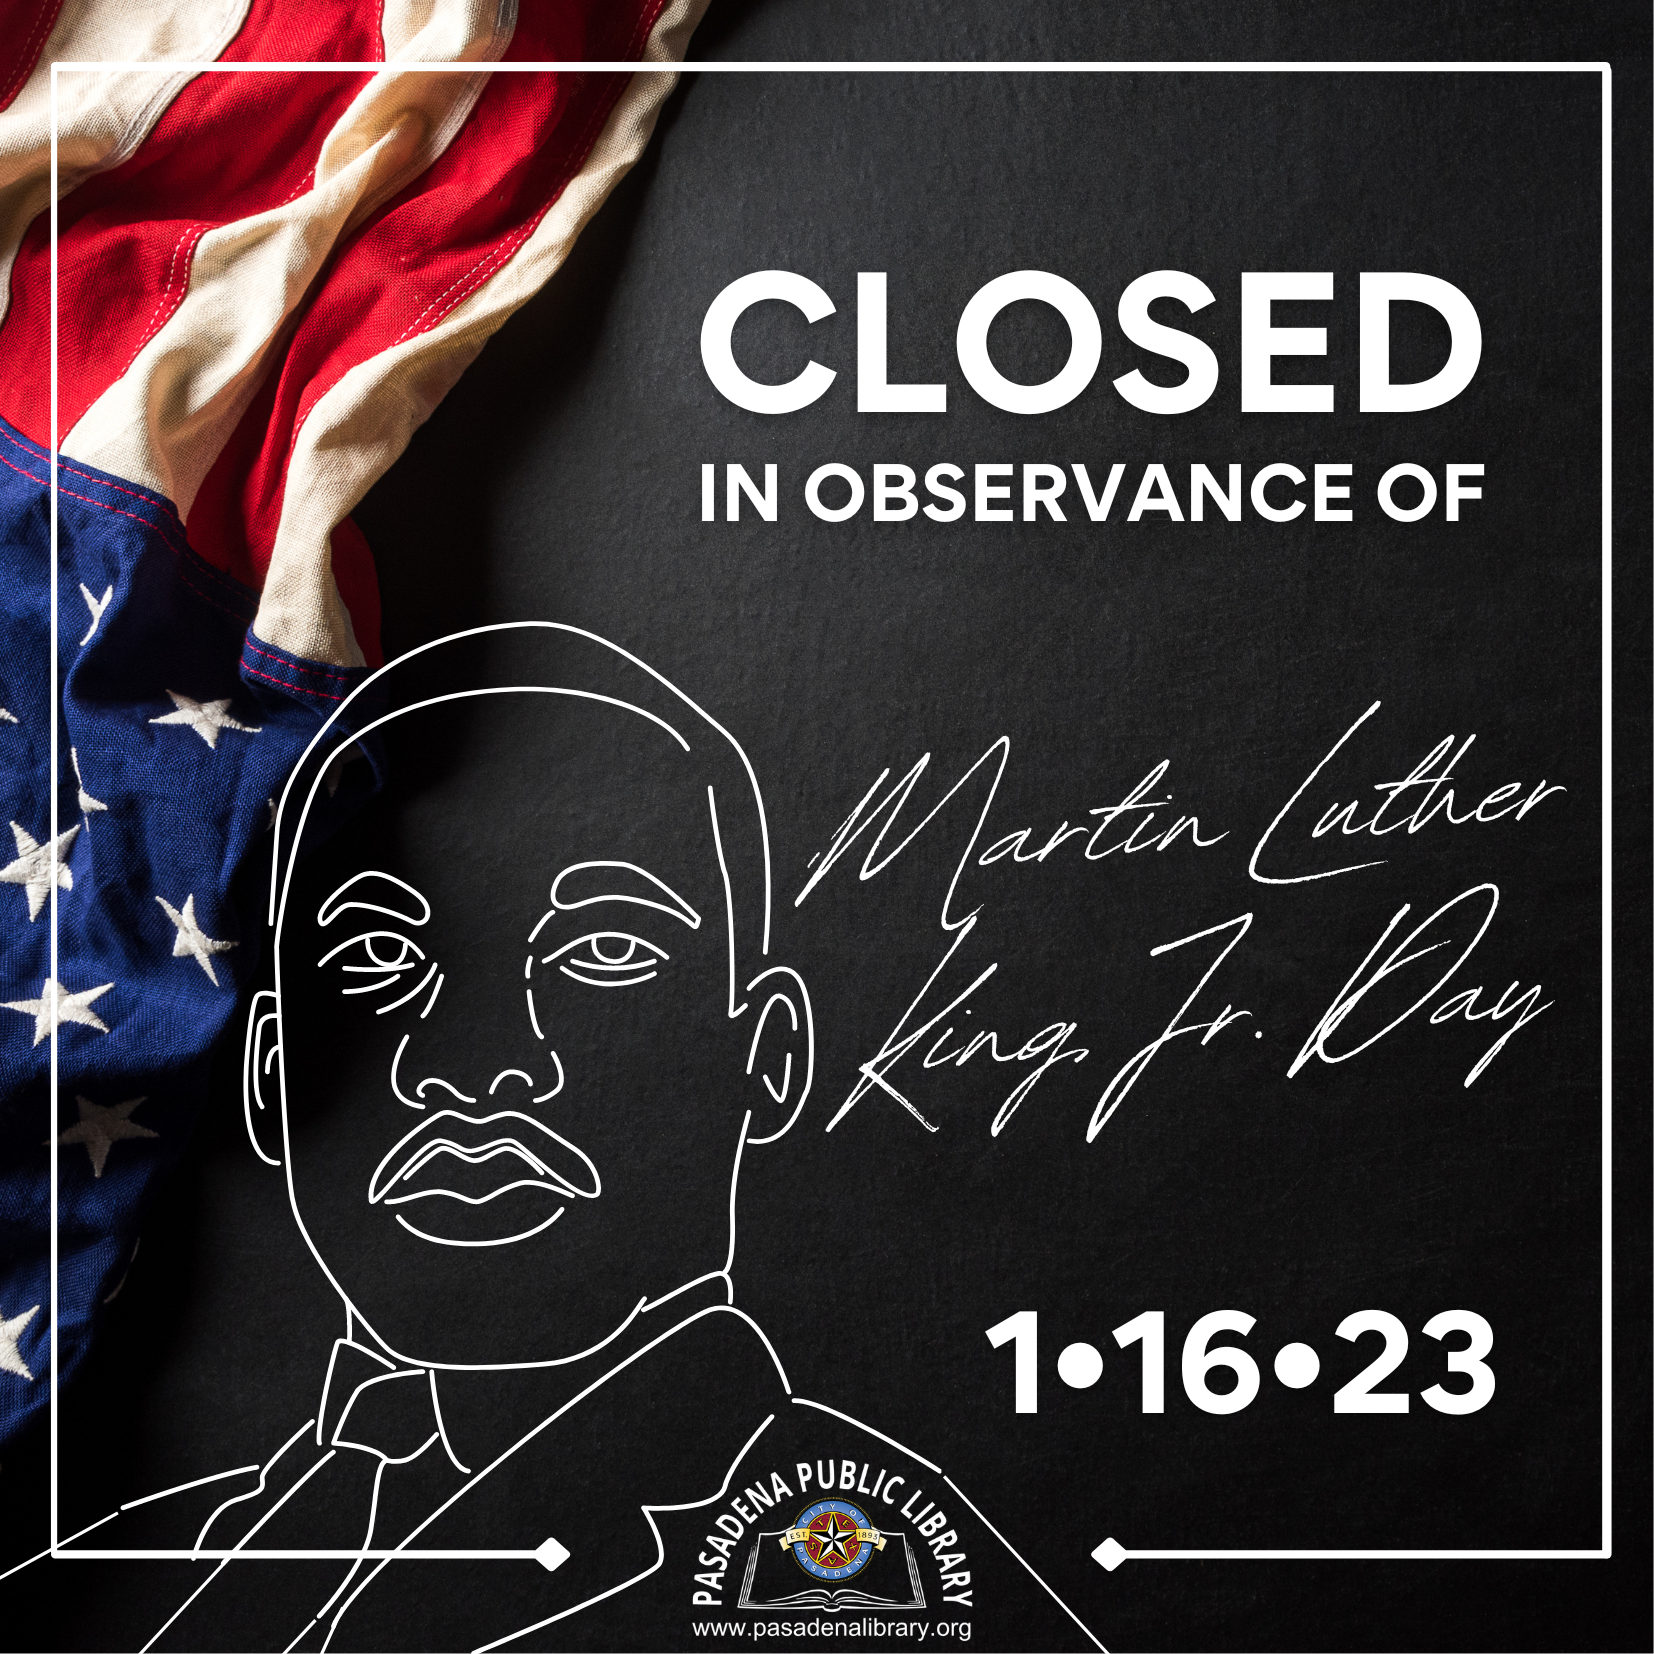 Closed in observance of Martin Luther King, Jr. Day